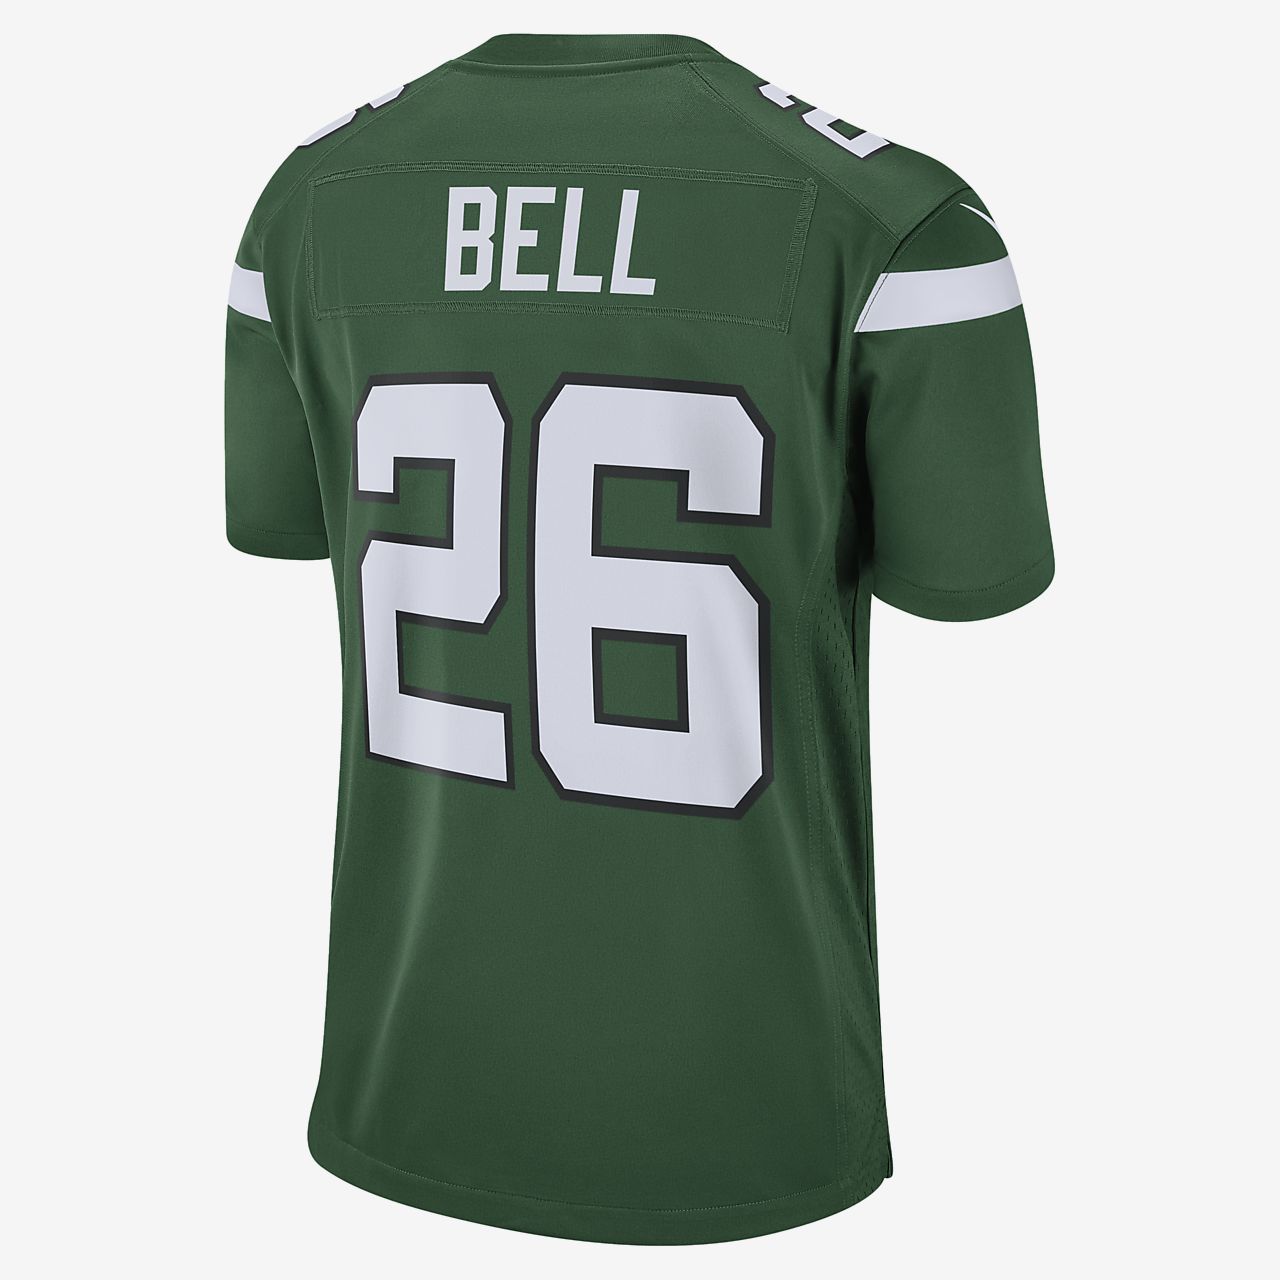 personalized baby jets jersey